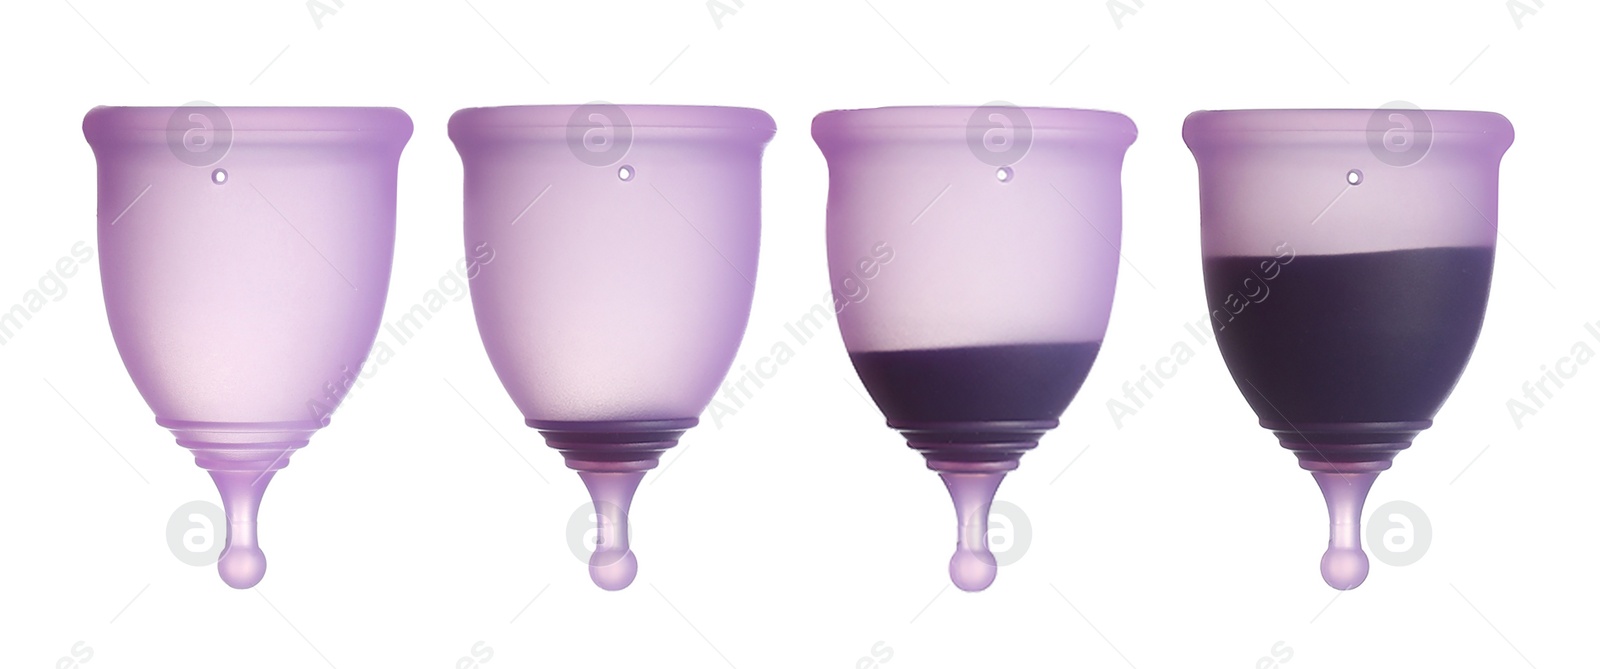 Image of Purple menstrual cups on white background, collage. Banner design